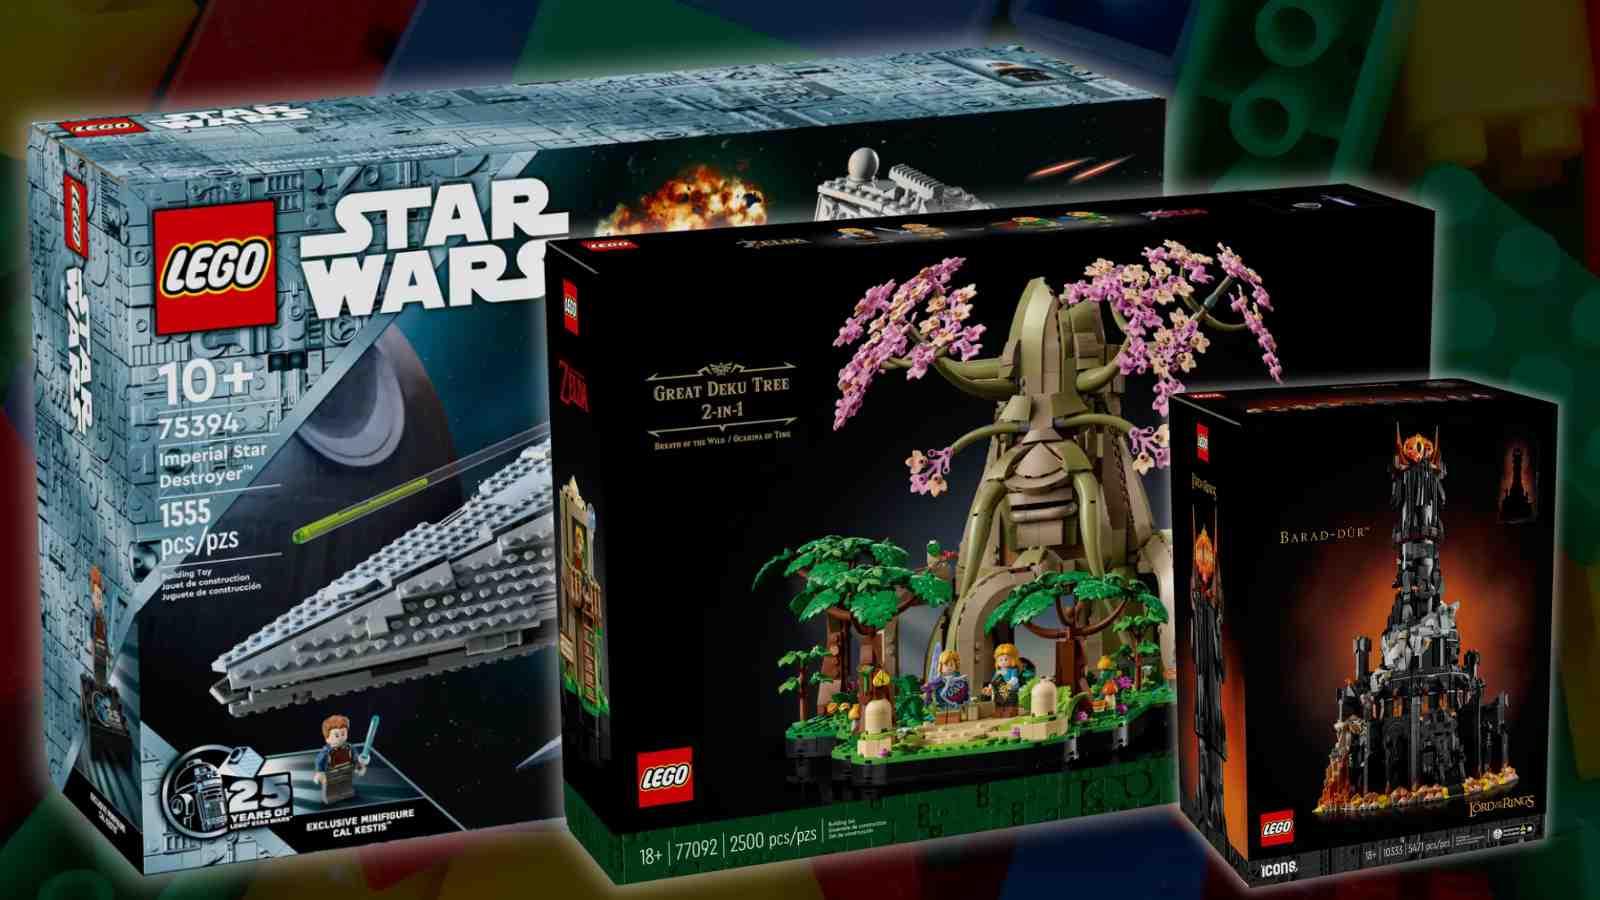 Three of the upcoming LEGO sets